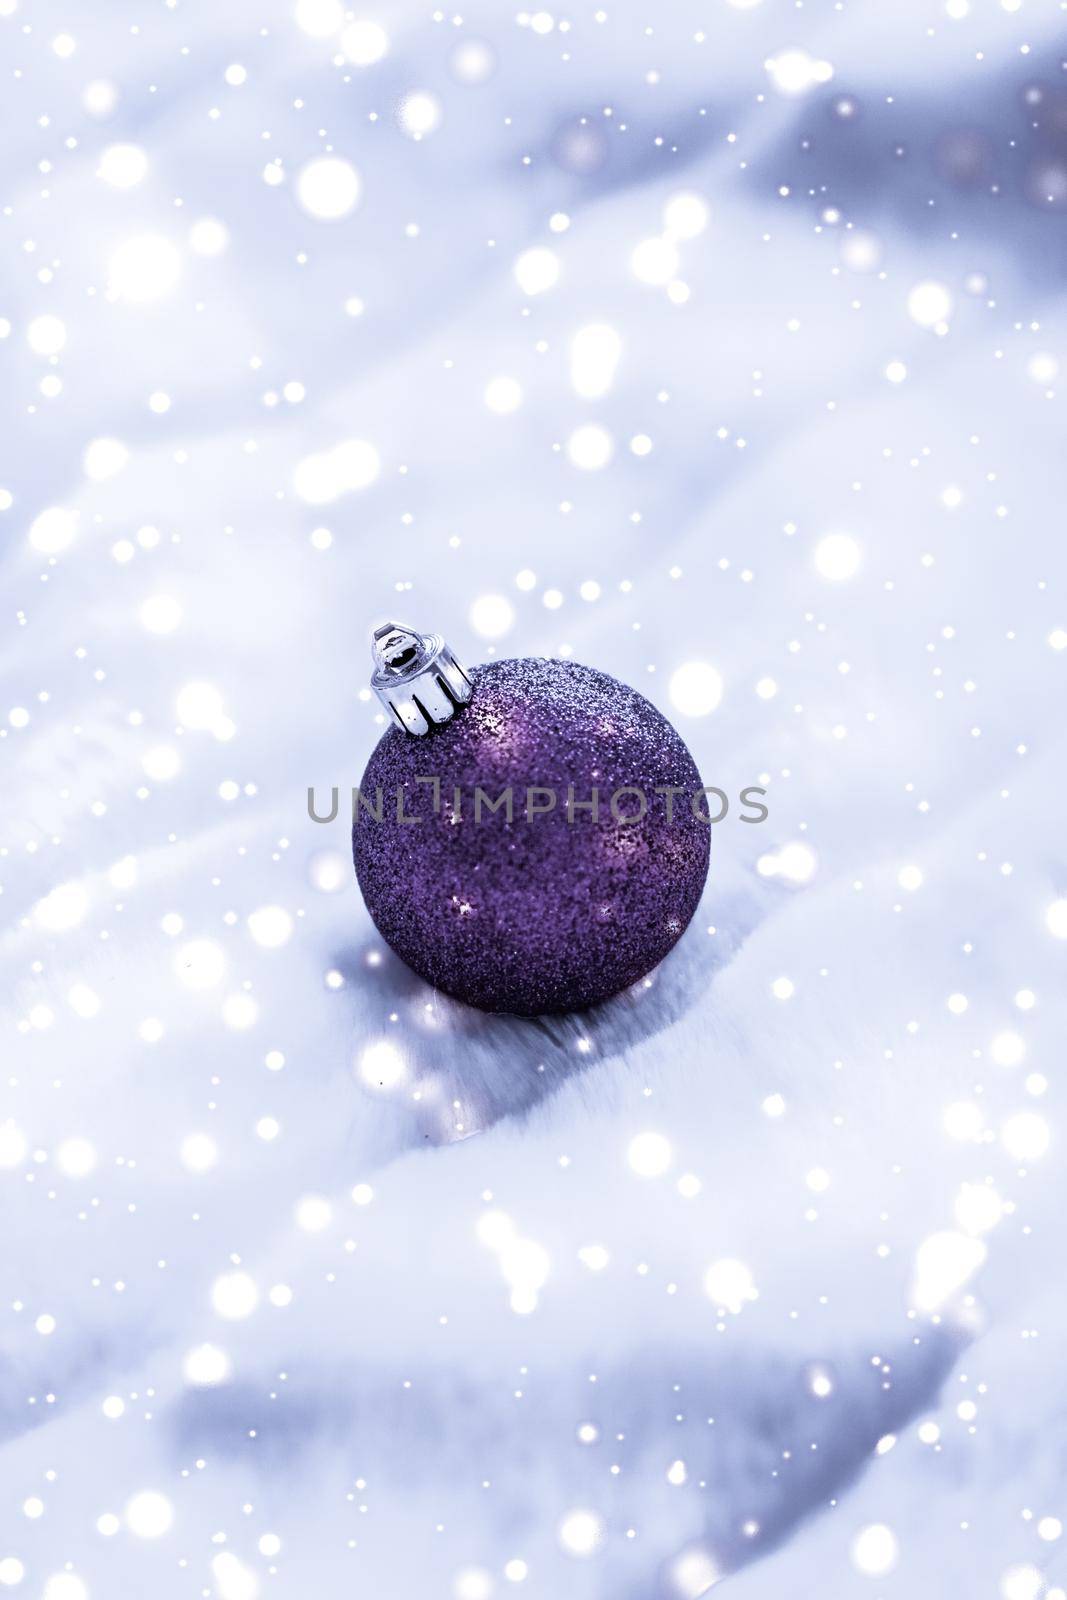 Violet Christmas baubles on fluffy fur with snow glitter, luxury winter holiday design background by Anneleven